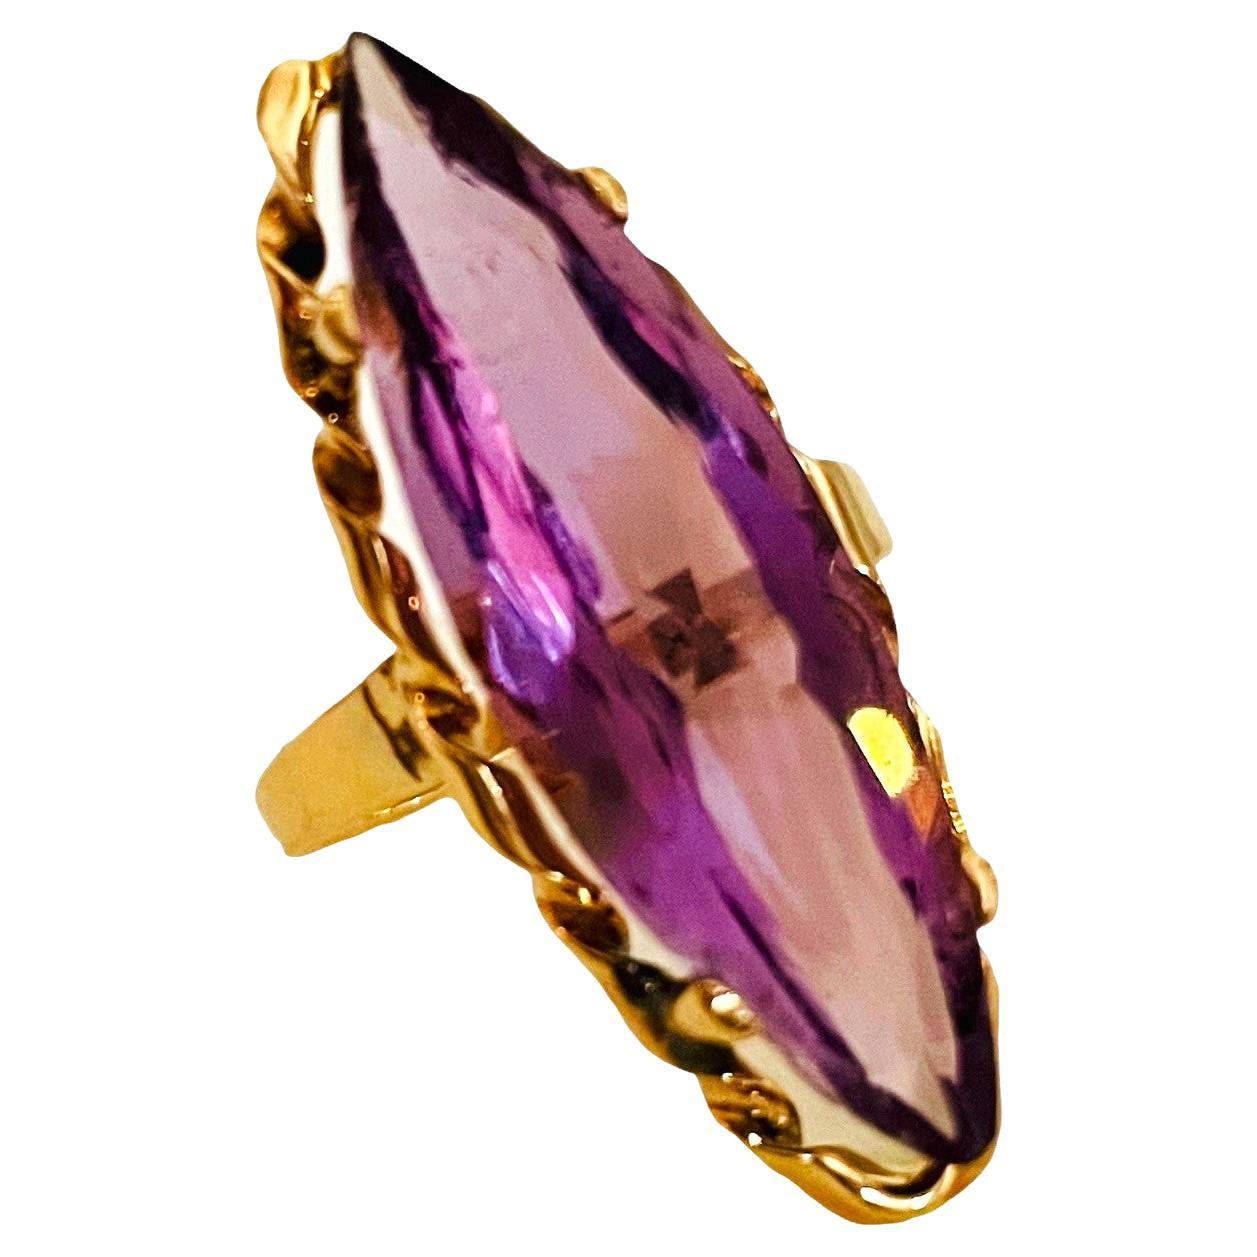 Attached is a Retail Appraisal for the secondary jewelry market.  This is not for insurance replacement value which would be much higher than this.

14K YG Amethyst Ring with twisted edged border

1 Large Marquis Shaped Amethyst Ring
Measuring